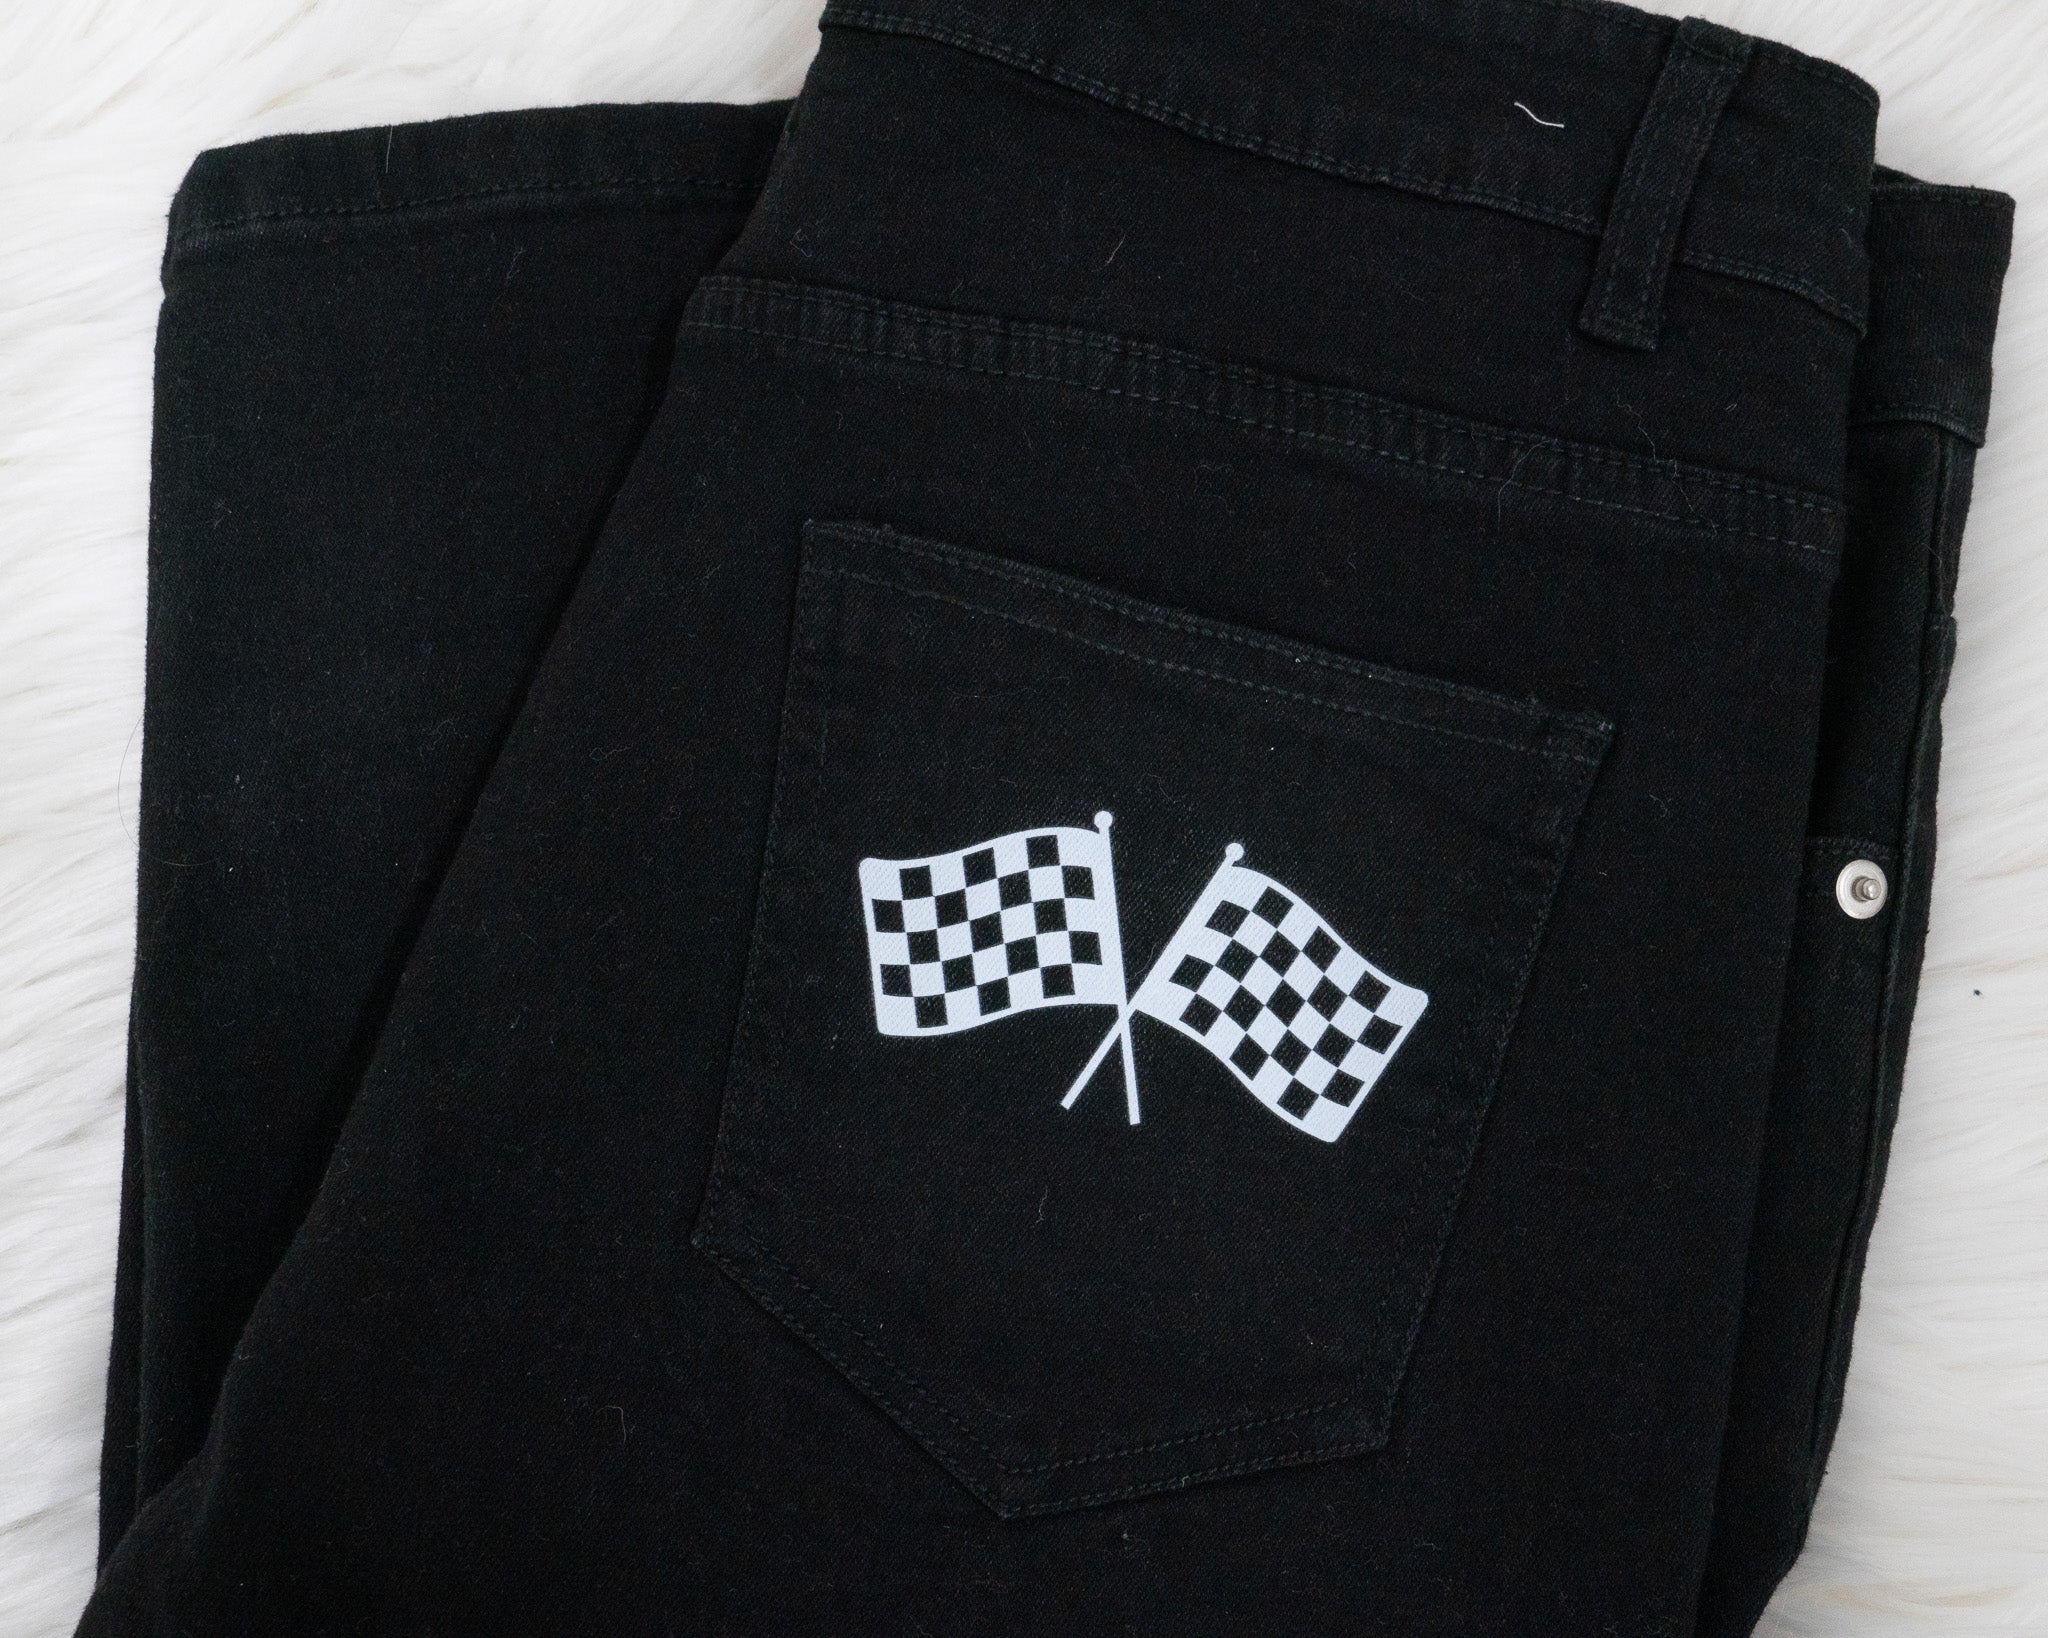 Black Checkered Jeans Pants,baby Boy White Black Checker Pants.baby  Leggings,boy Jeans Trousers,toddle Jeans - Etsy